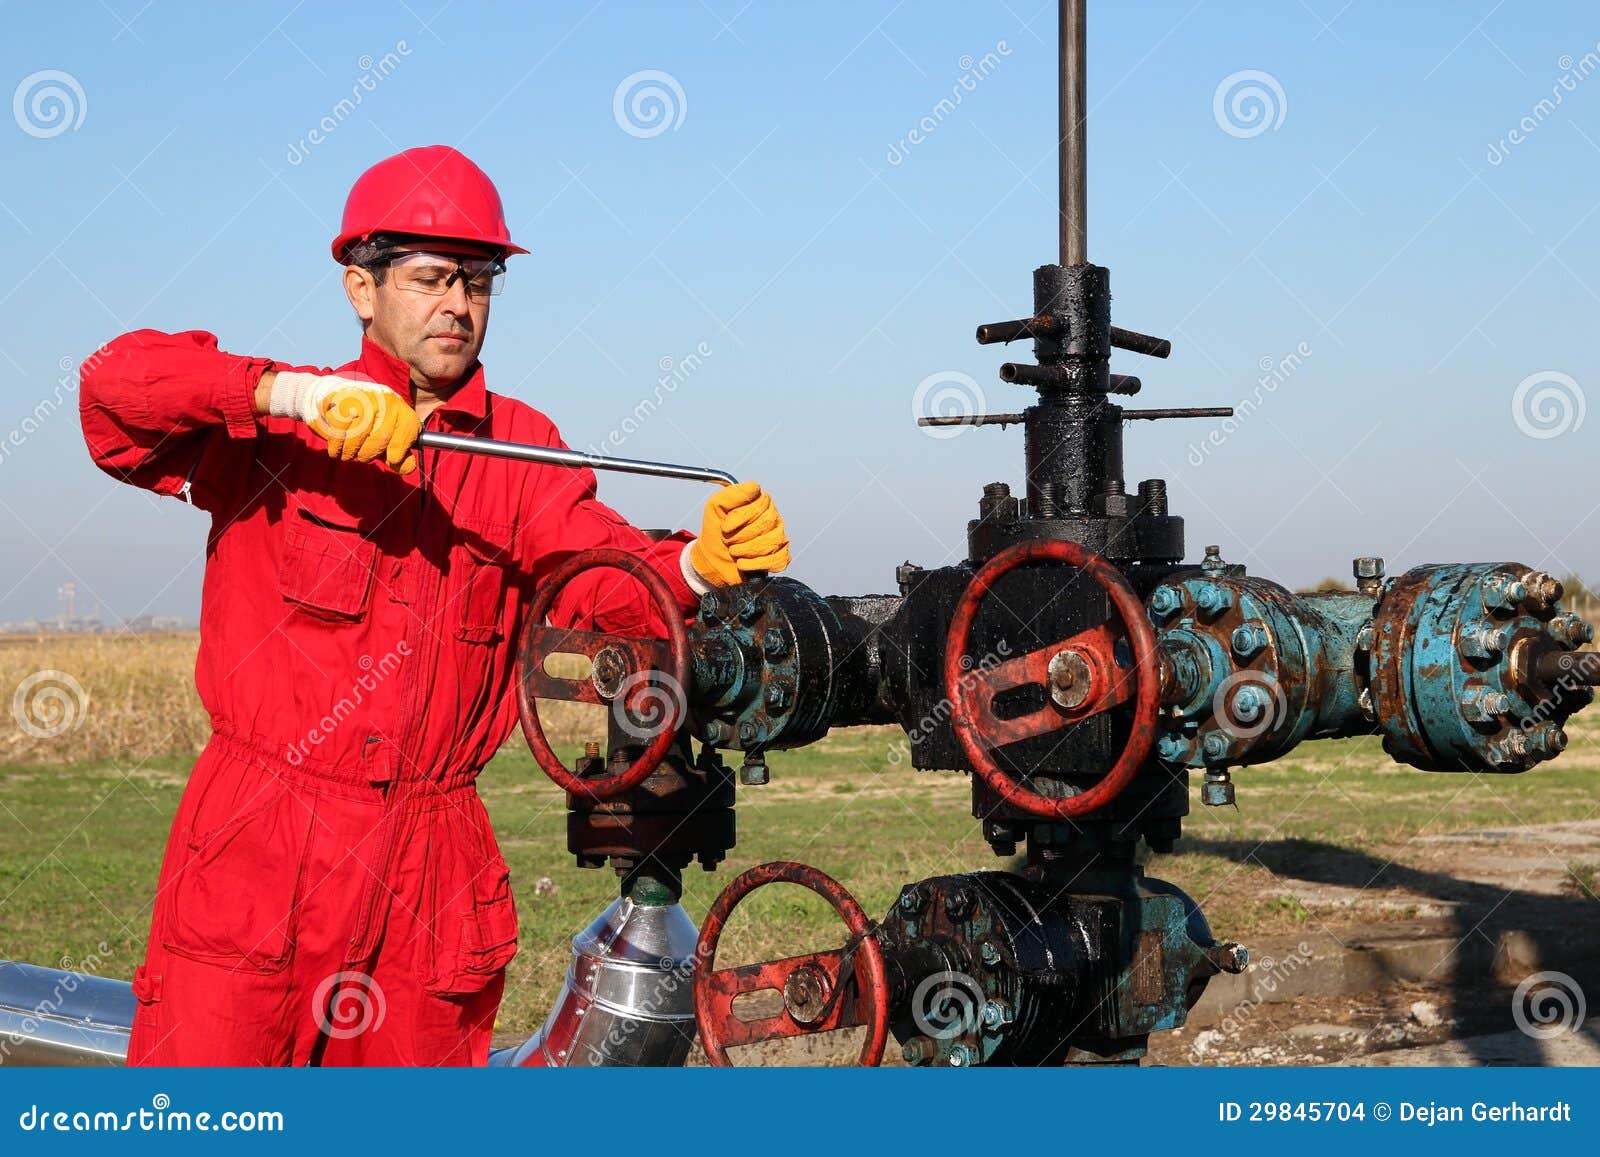 657 Man Oil Rig Working Stock Photos - Free & Royalty-Free Stock